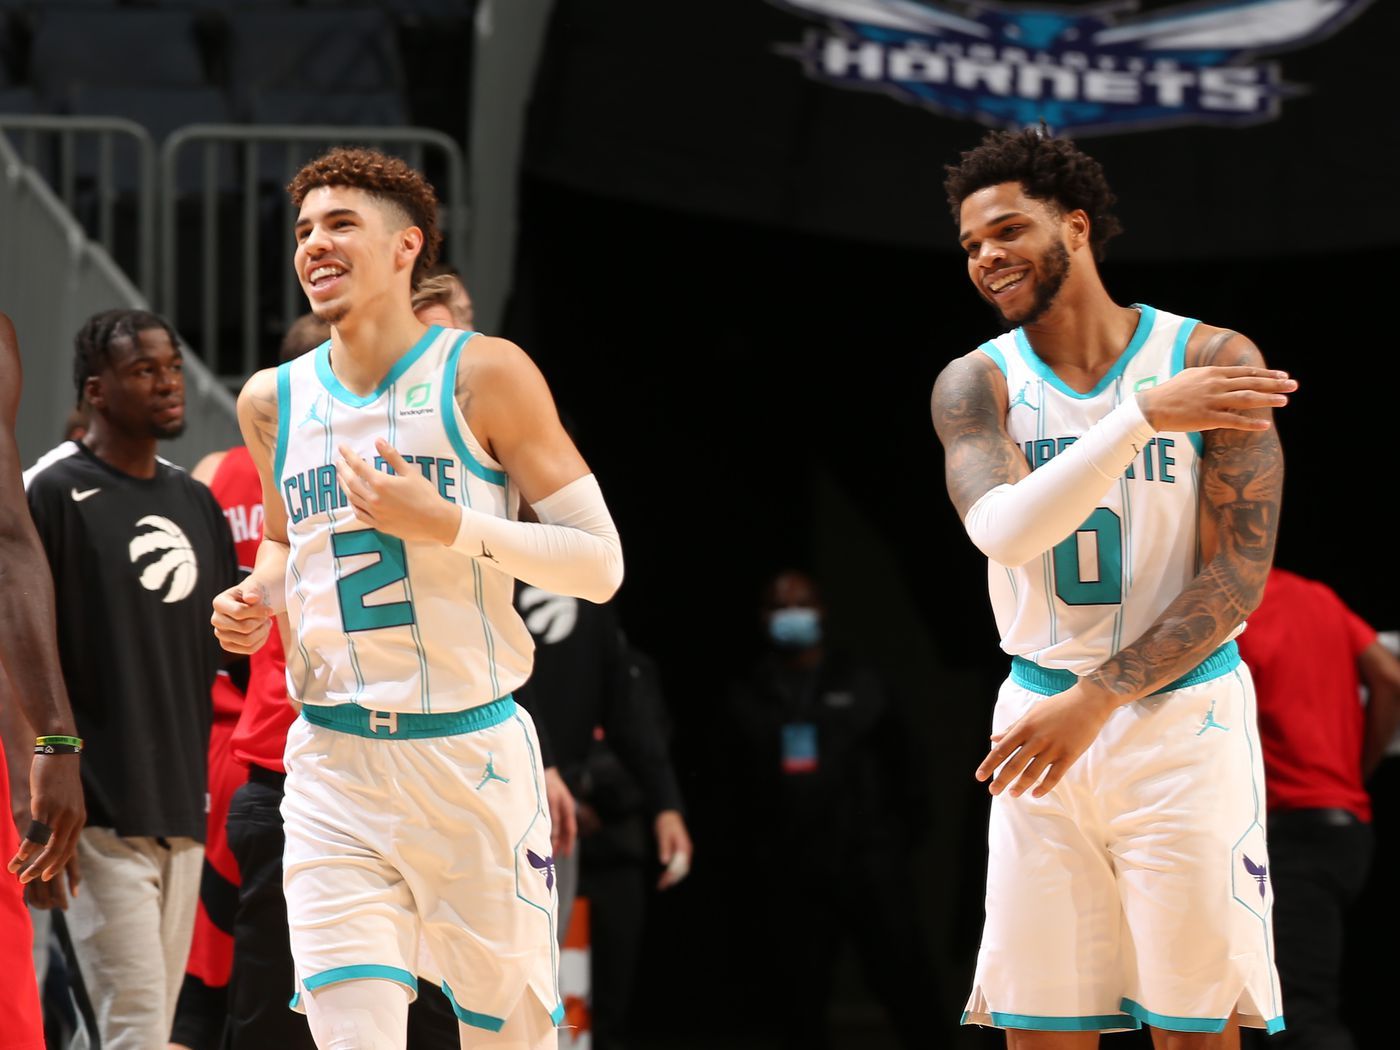 Could the Hornets sweep the NBA Awards this year? The Hive